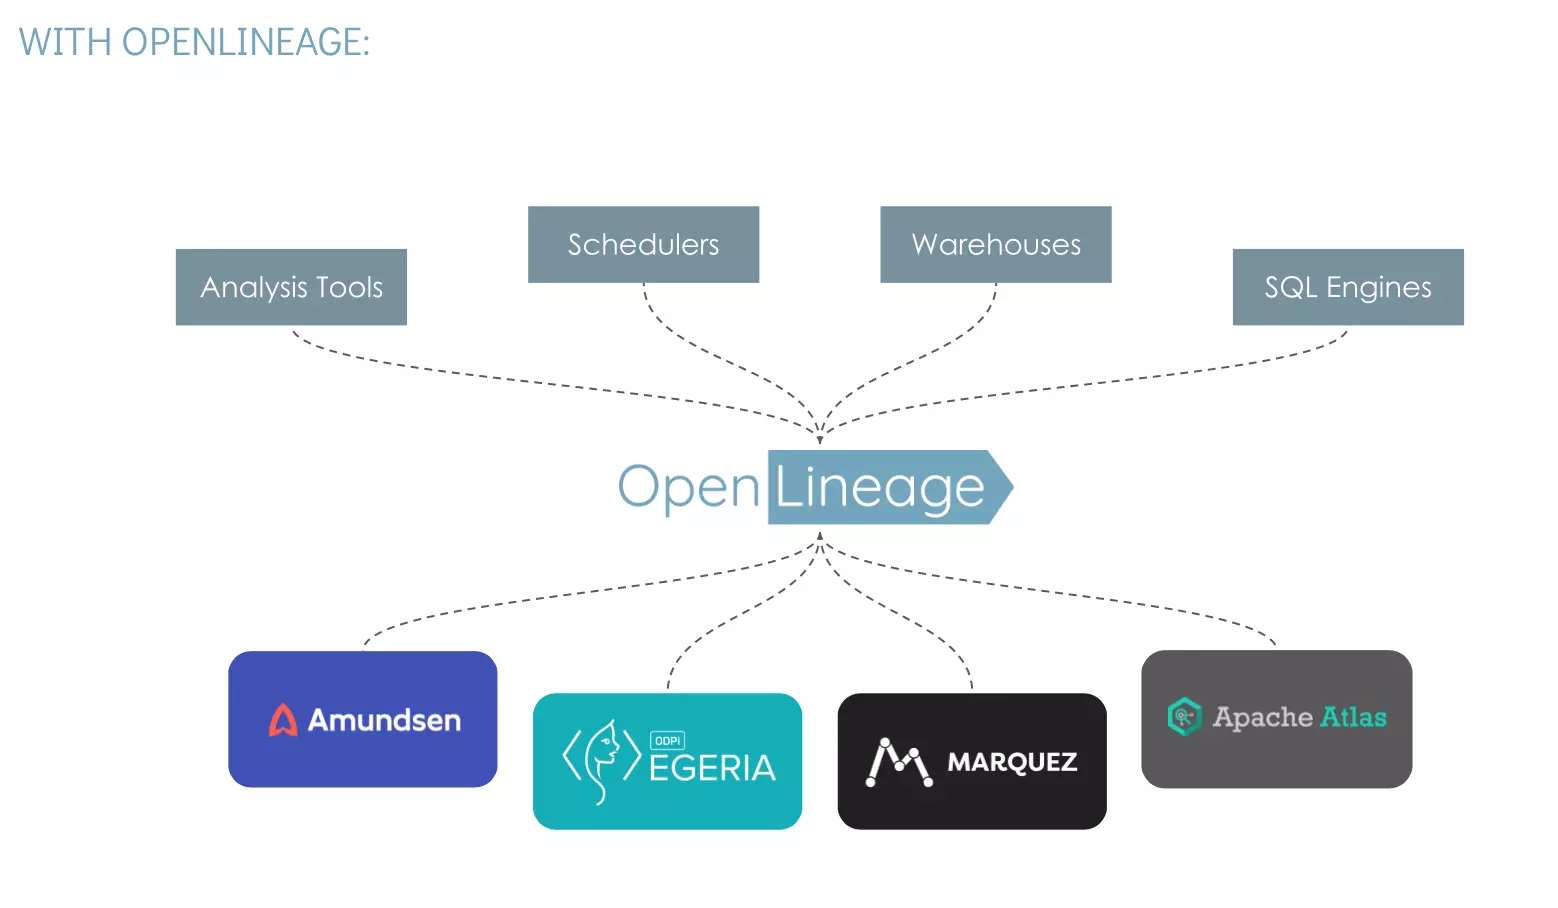 How OpenLineage can help you get data flow visibility and collaborate more effectively with other data practitioners